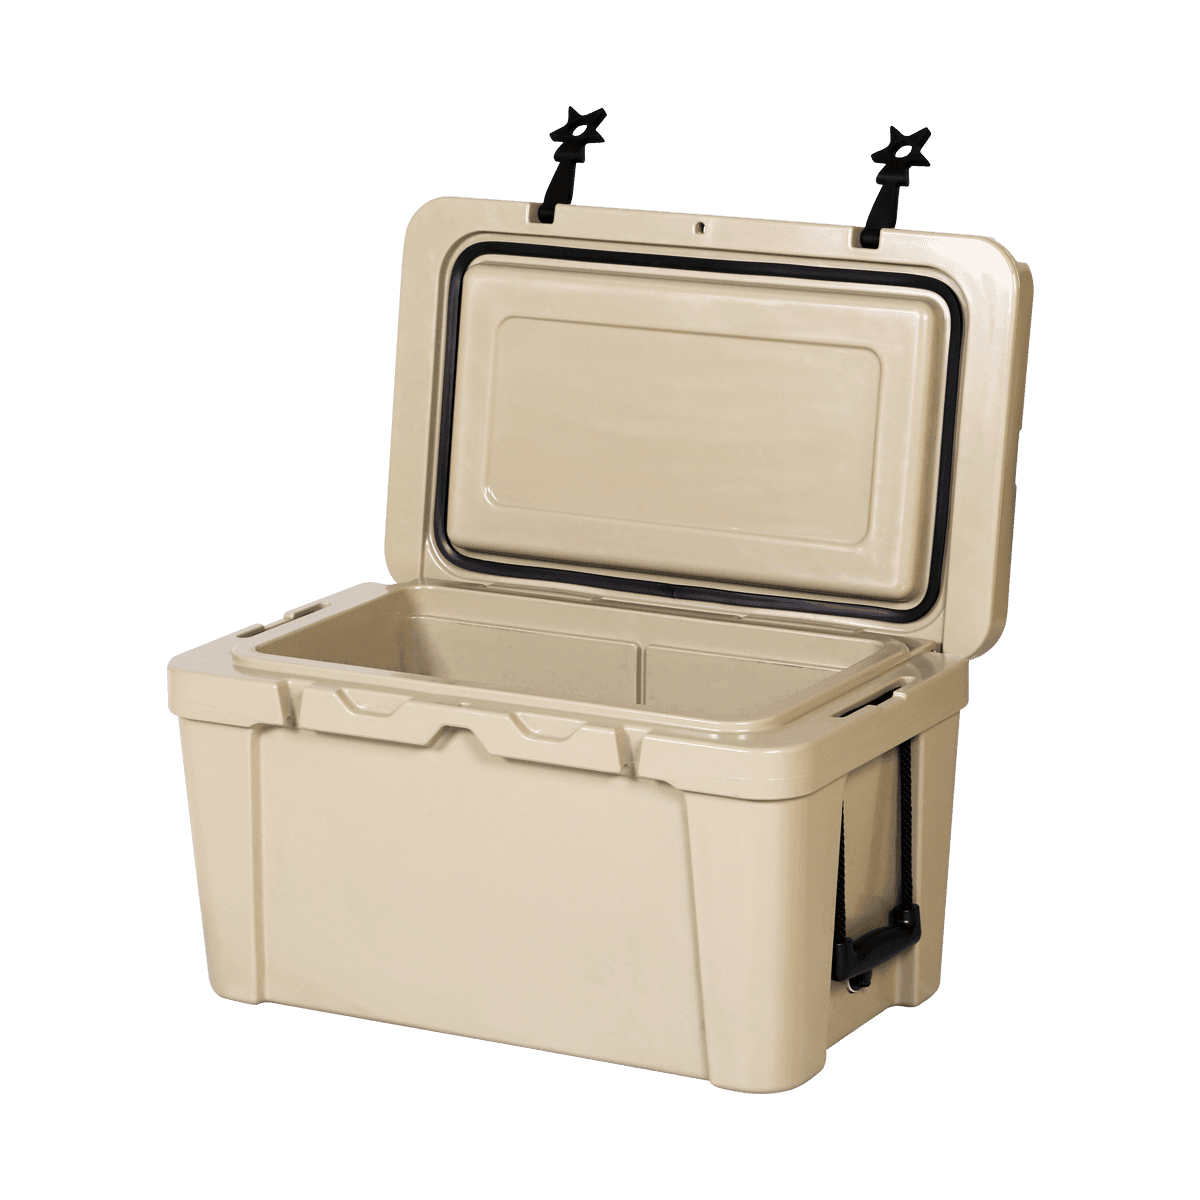 K-25L Portable Cooler Outdoor Leisure Use Cooler Box